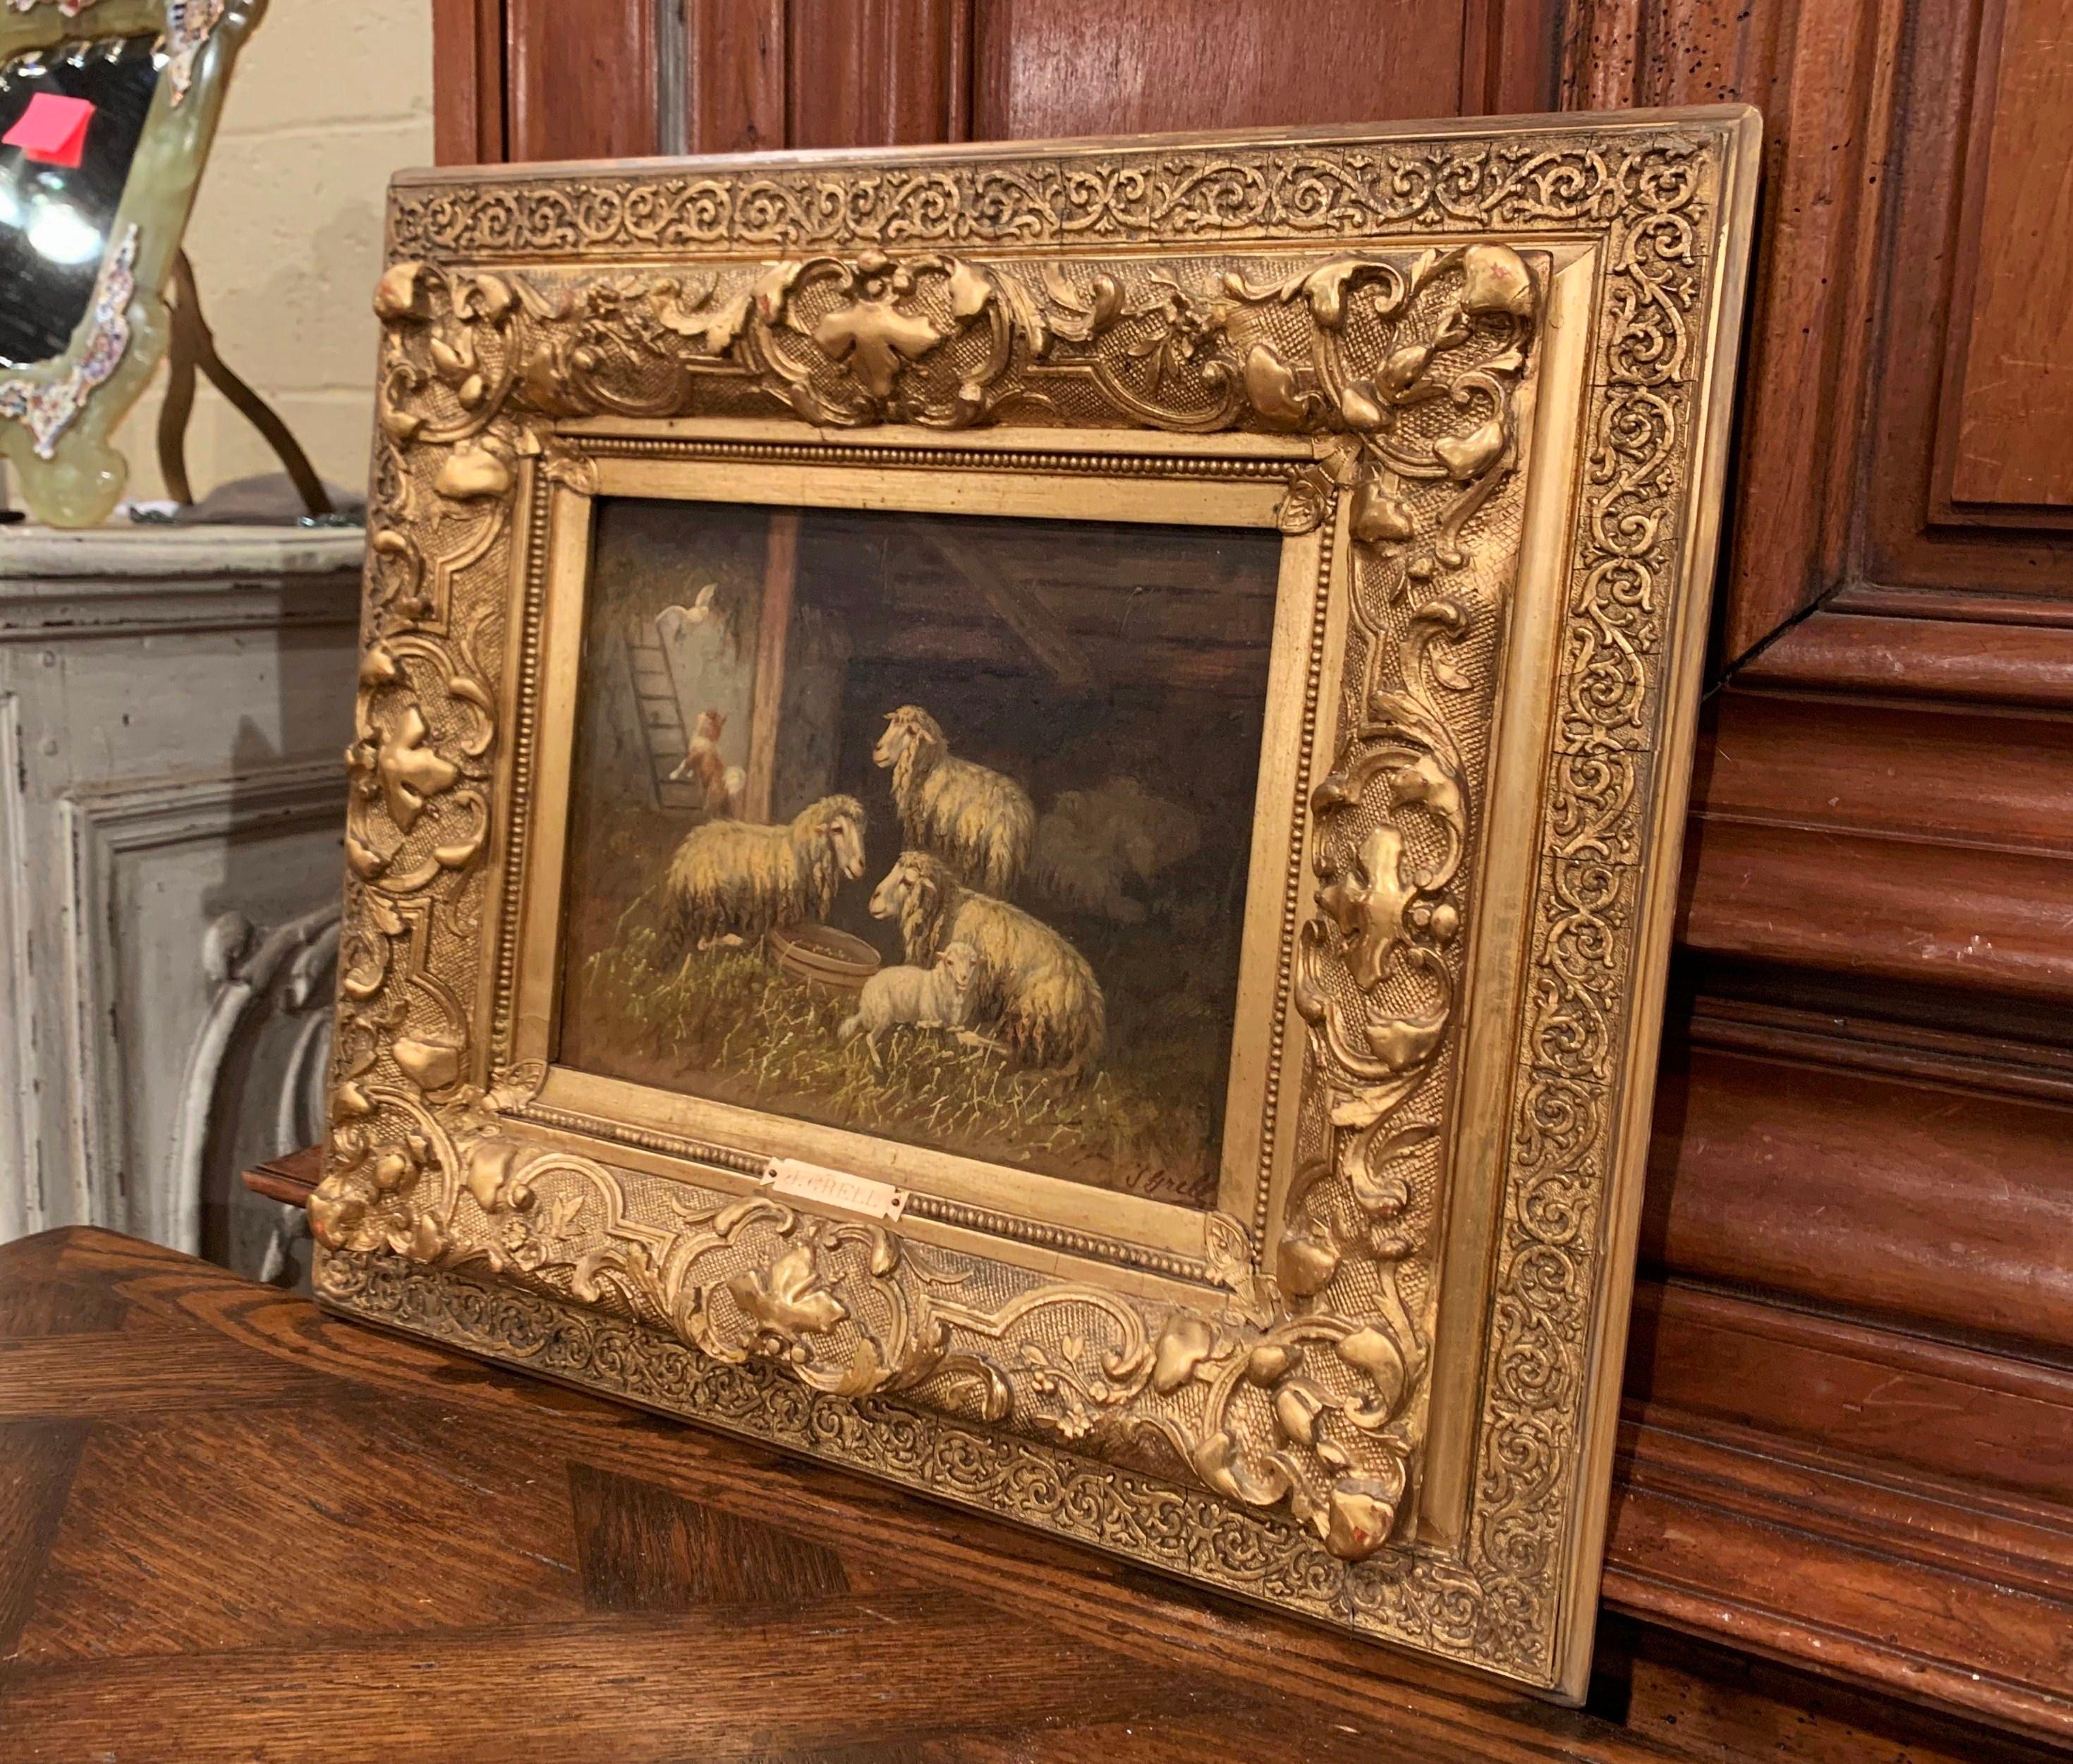 Giltwood 19th Century Sheep and Ram Painting in Carved Gilt Frame Signed Johanna Grell